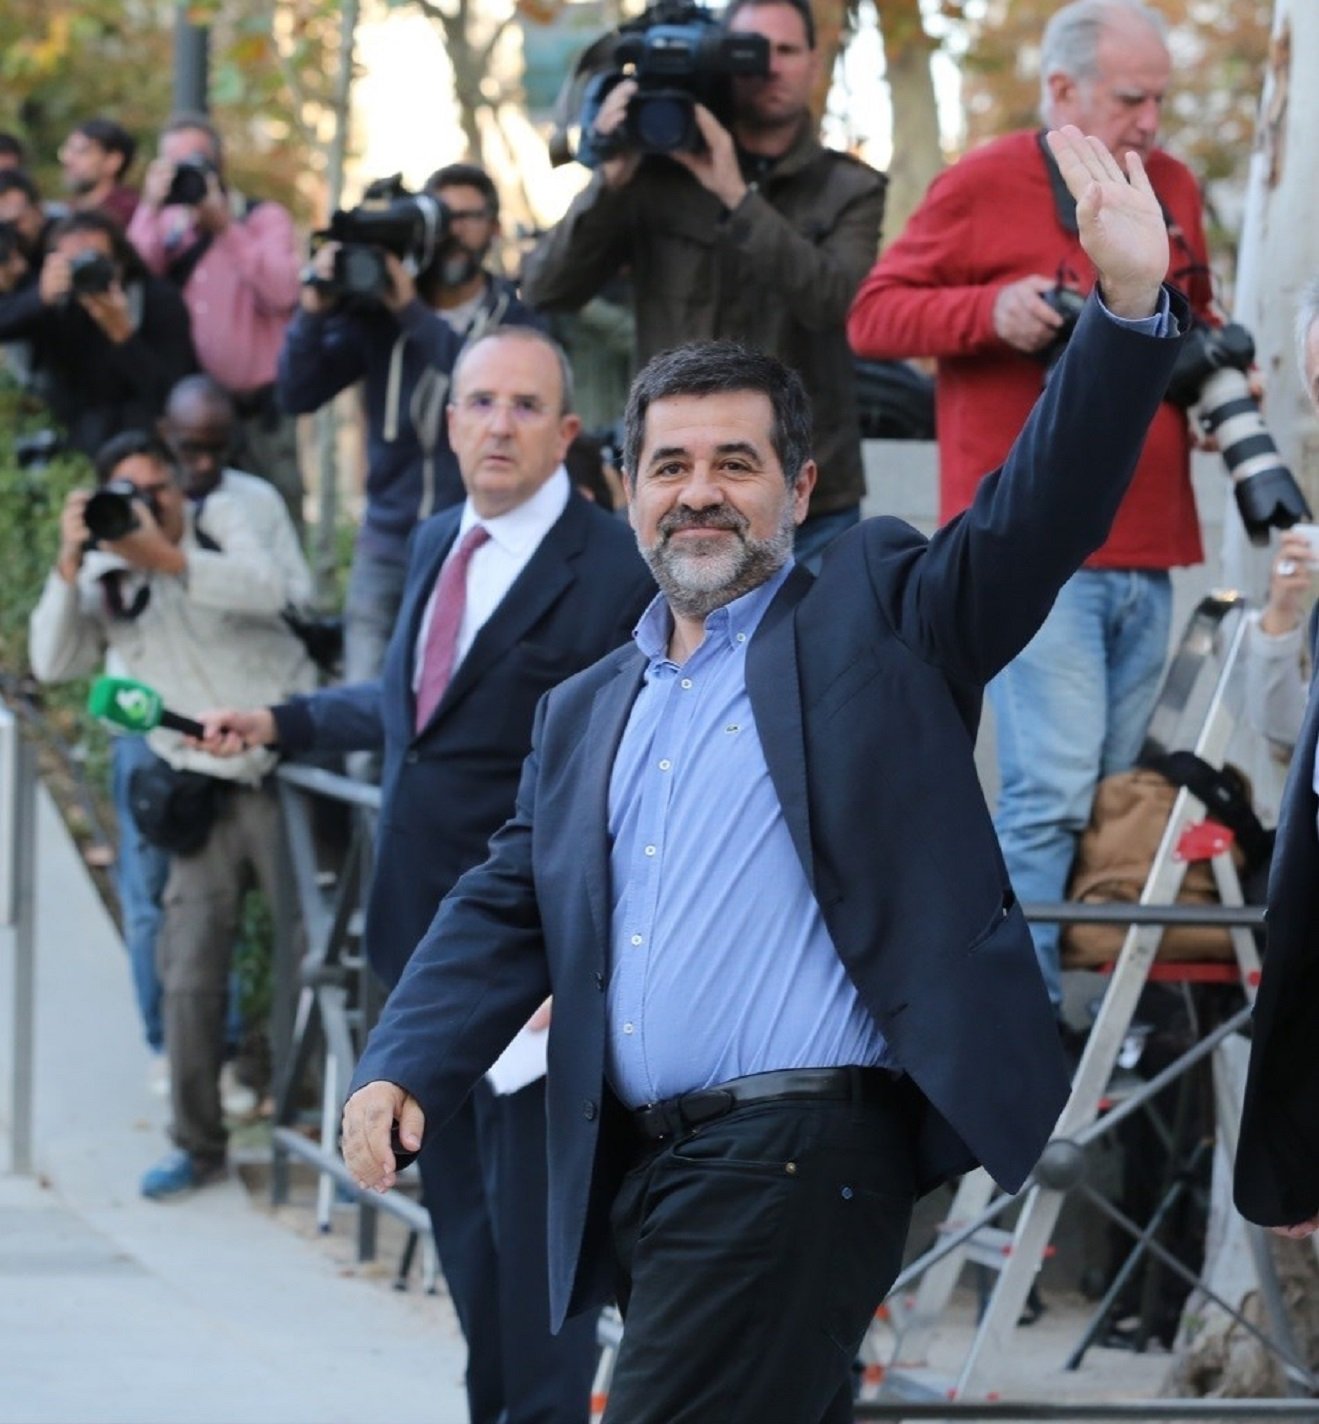 Jordi Sànchez tells the Supreme Court he would renounce his seat if the unilateral path is chosen